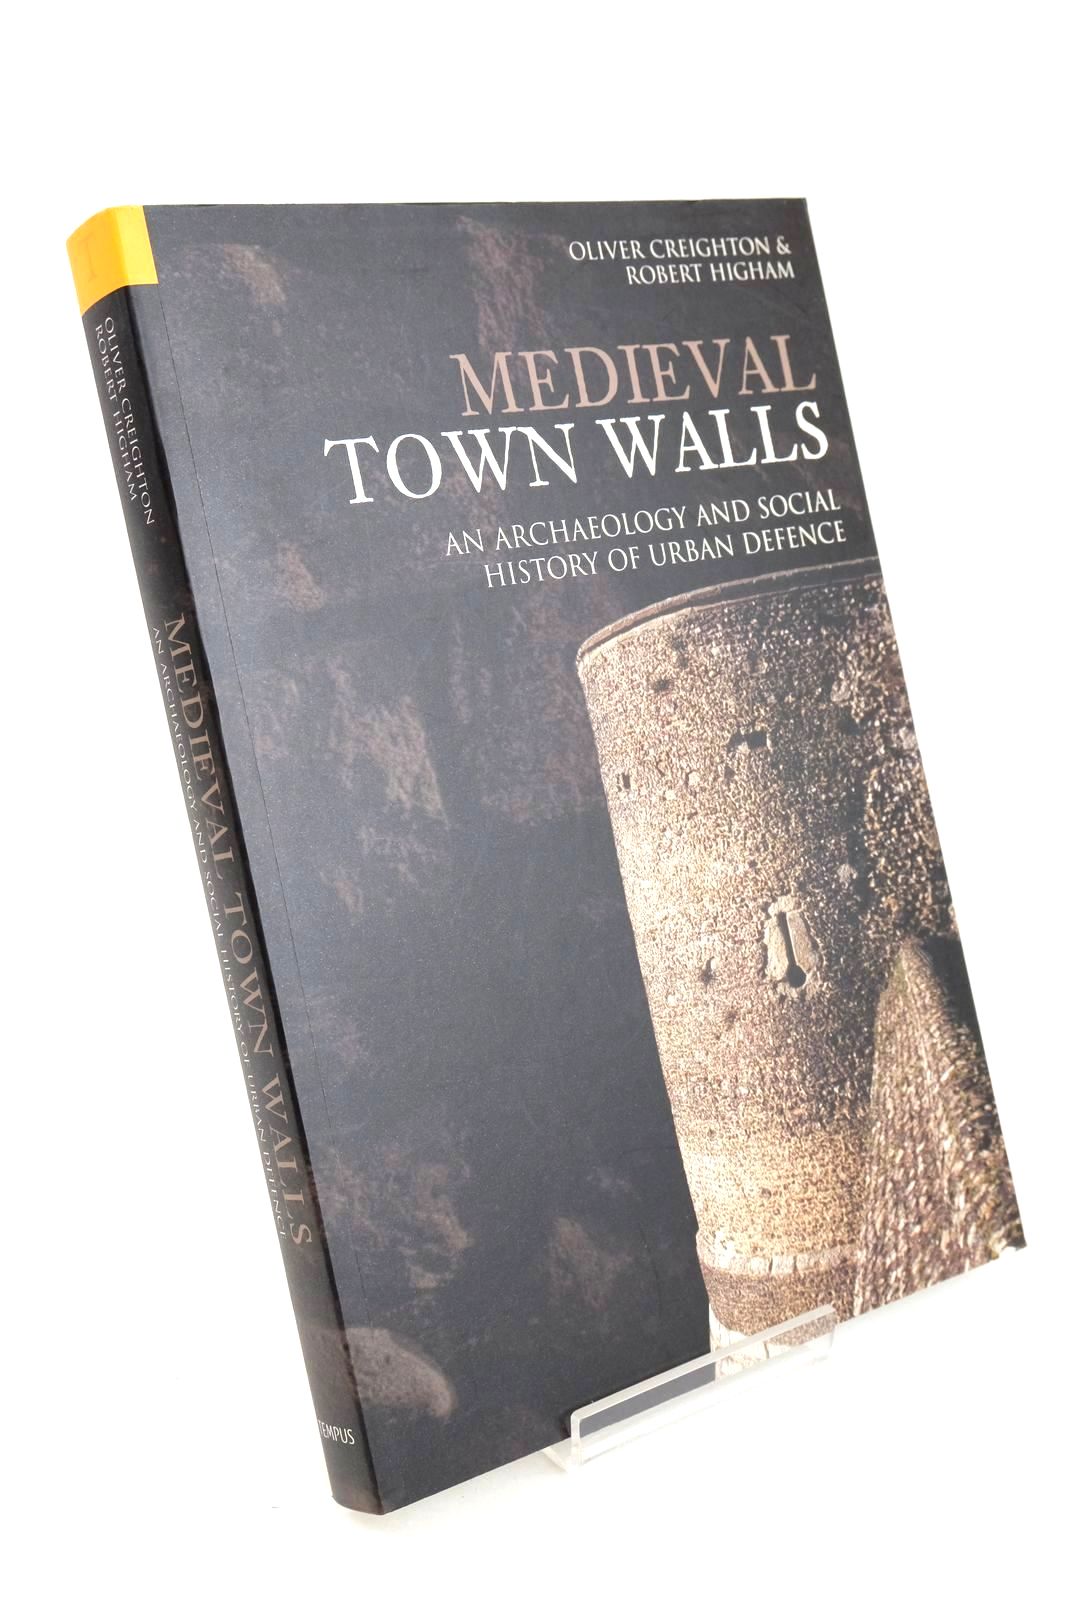 Photo of MEDIEVAL TOWN WALLS: AN ARCHAEOLOGY AND SOCIAL HISTORY OF URBAN DEFENCE written by Creighton, Oliver Higham, Robert published by Tempus Publishing Ltd (STOCK CODE: 1327716)  for sale by Stella & Rose's Books